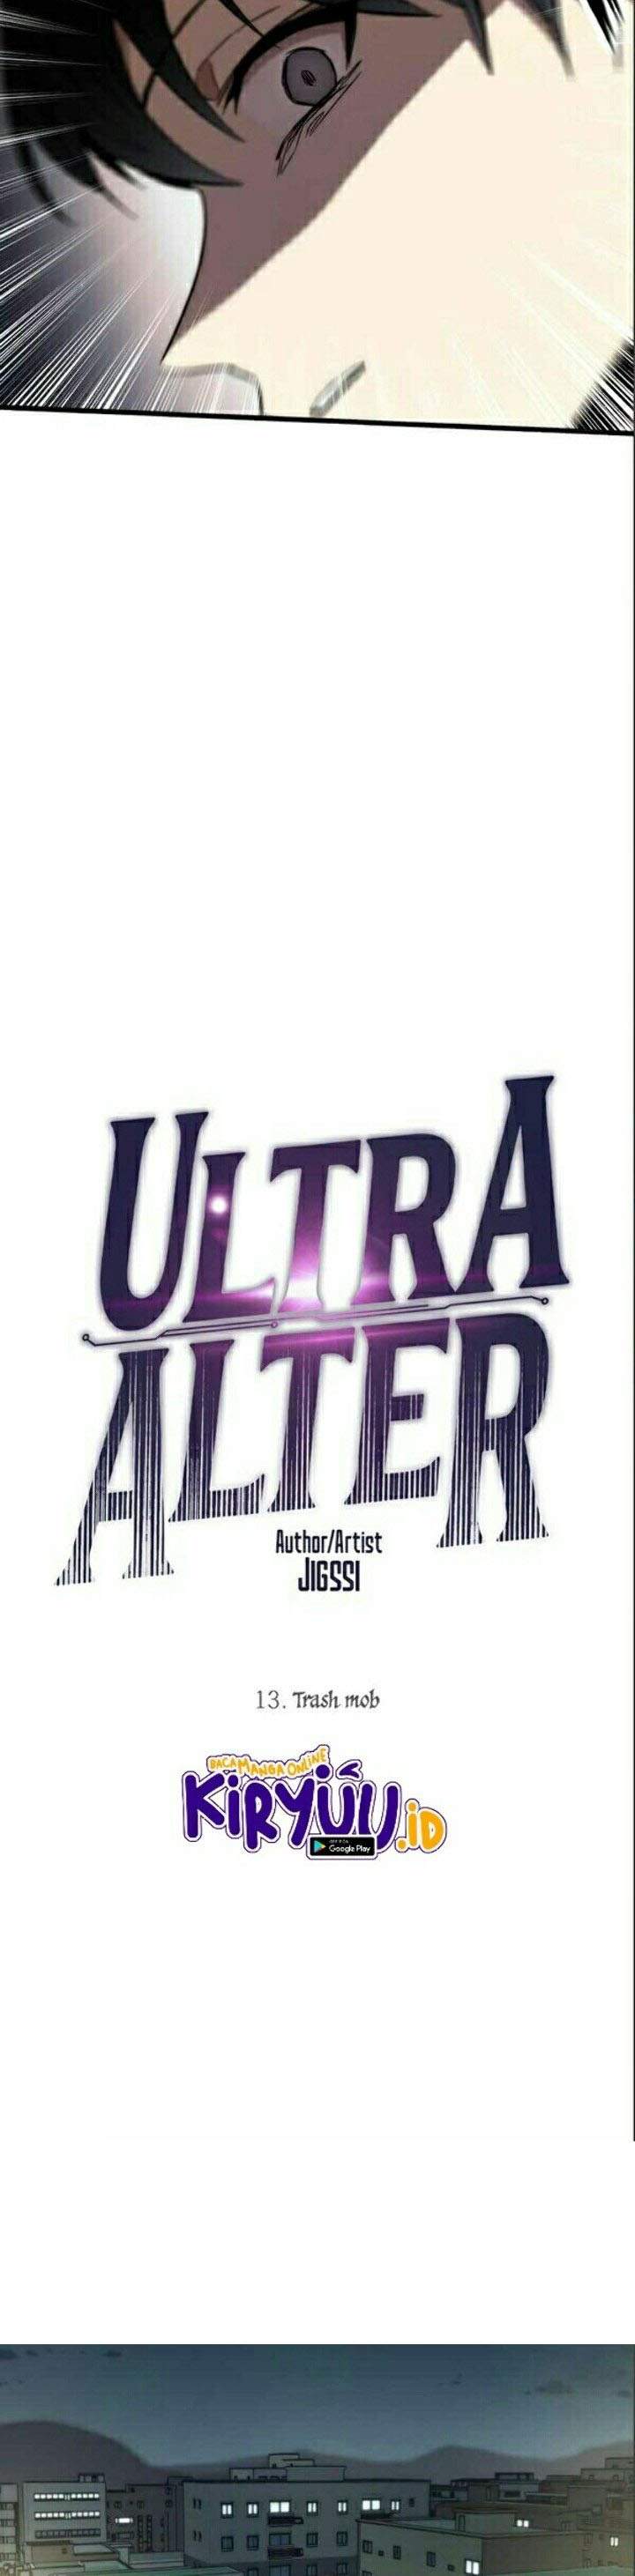 Ultra Alter Chapter 13